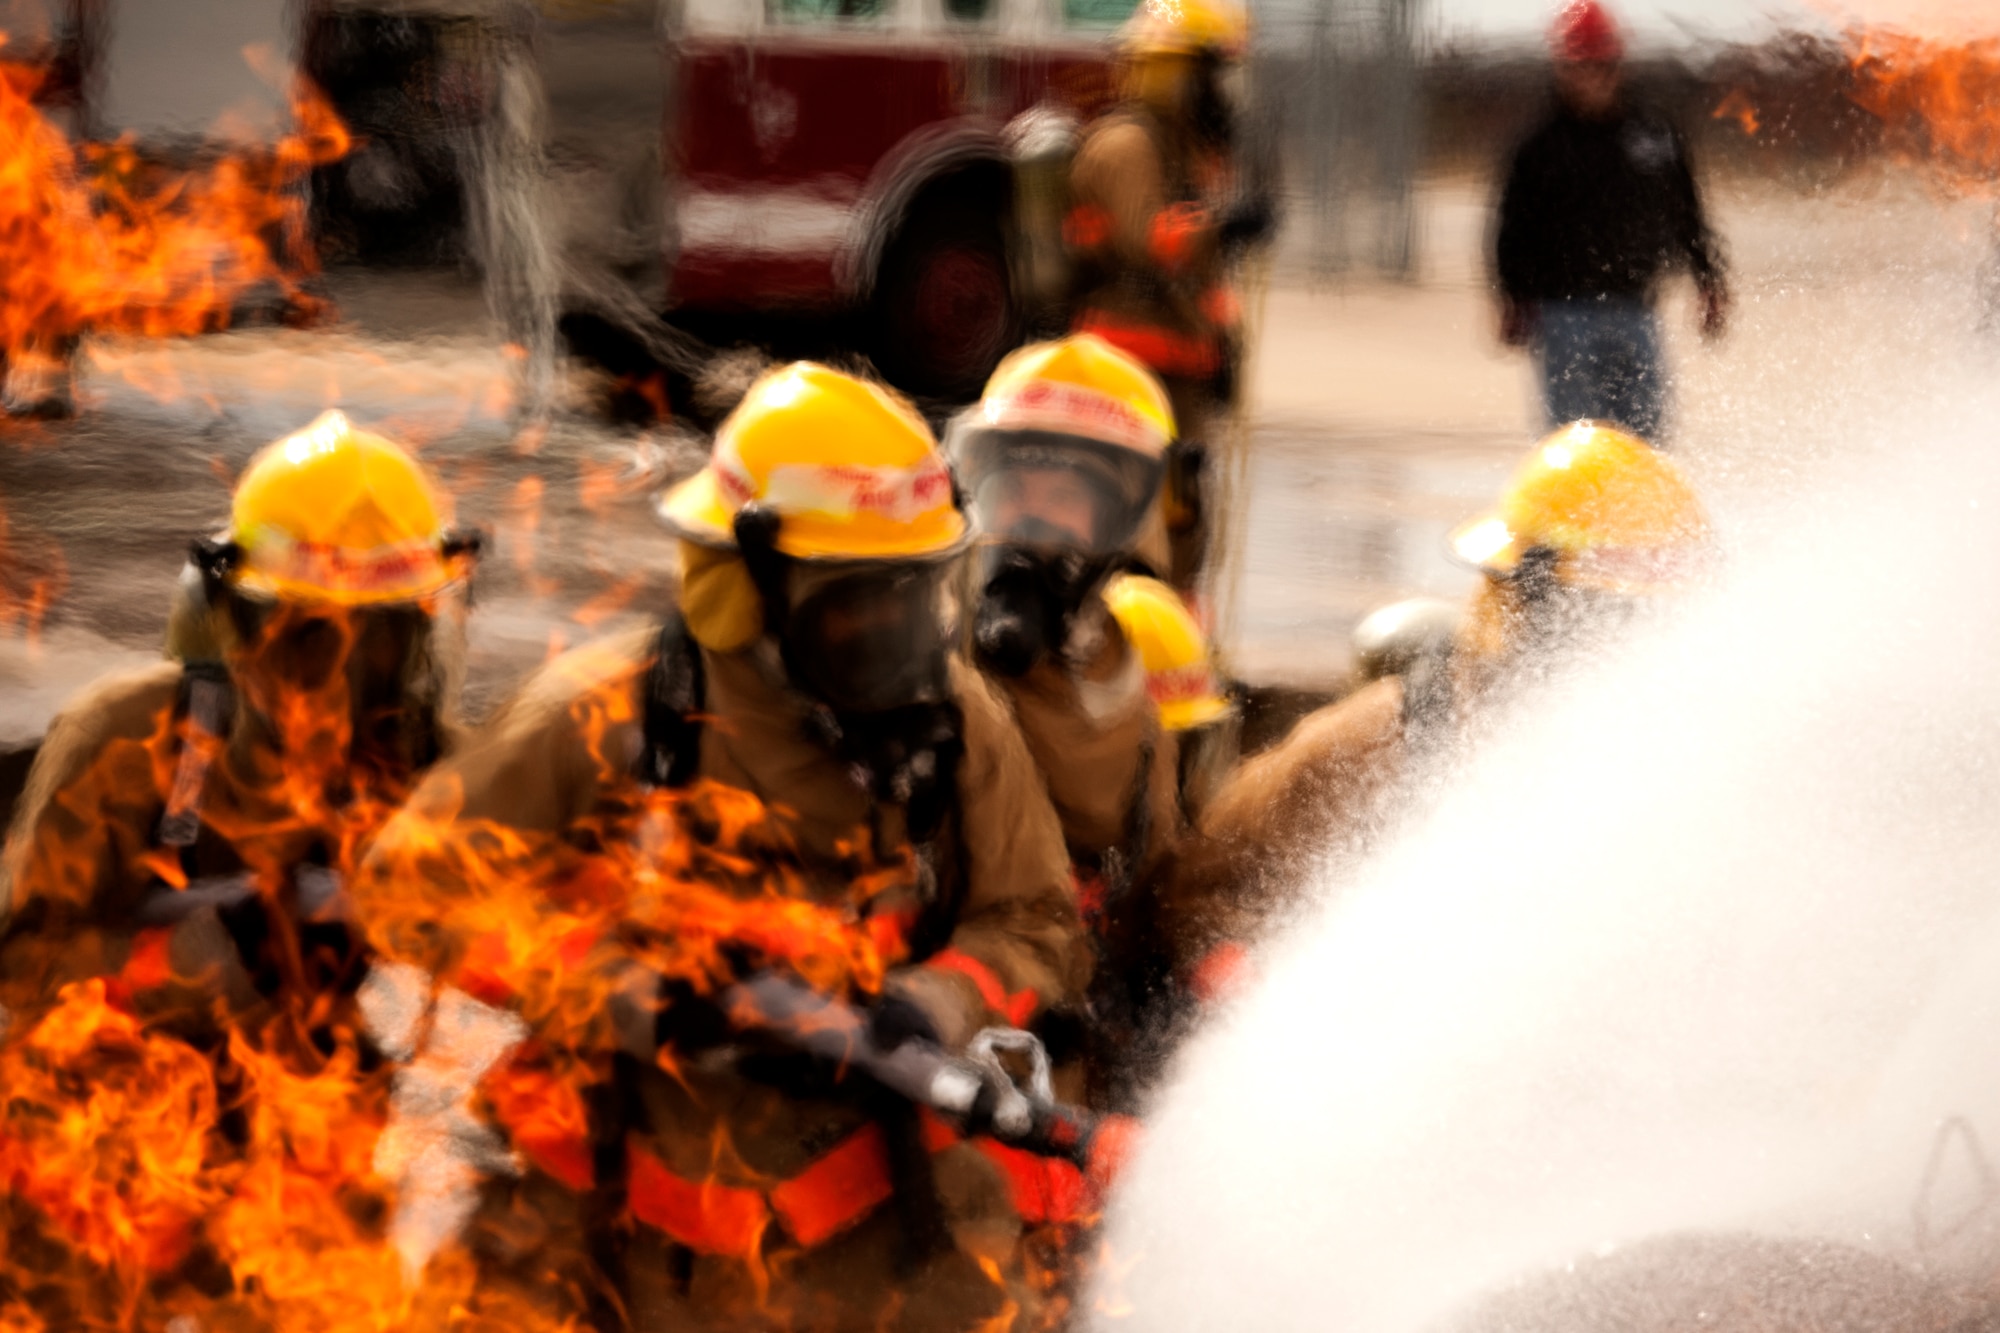 GOODFELLOW AIR FORCE BASE, Texas – Airman 1st Class Onnie O. McSpadden, 127th Michigan Air National Guard firefighting apprentice, leads his group to extinguish a fire, Feb. 3. The groups would rotate, each member being the lead on the water hose. 
(U.S. Air Force photo/ Senior Airman Scott Jackson)
